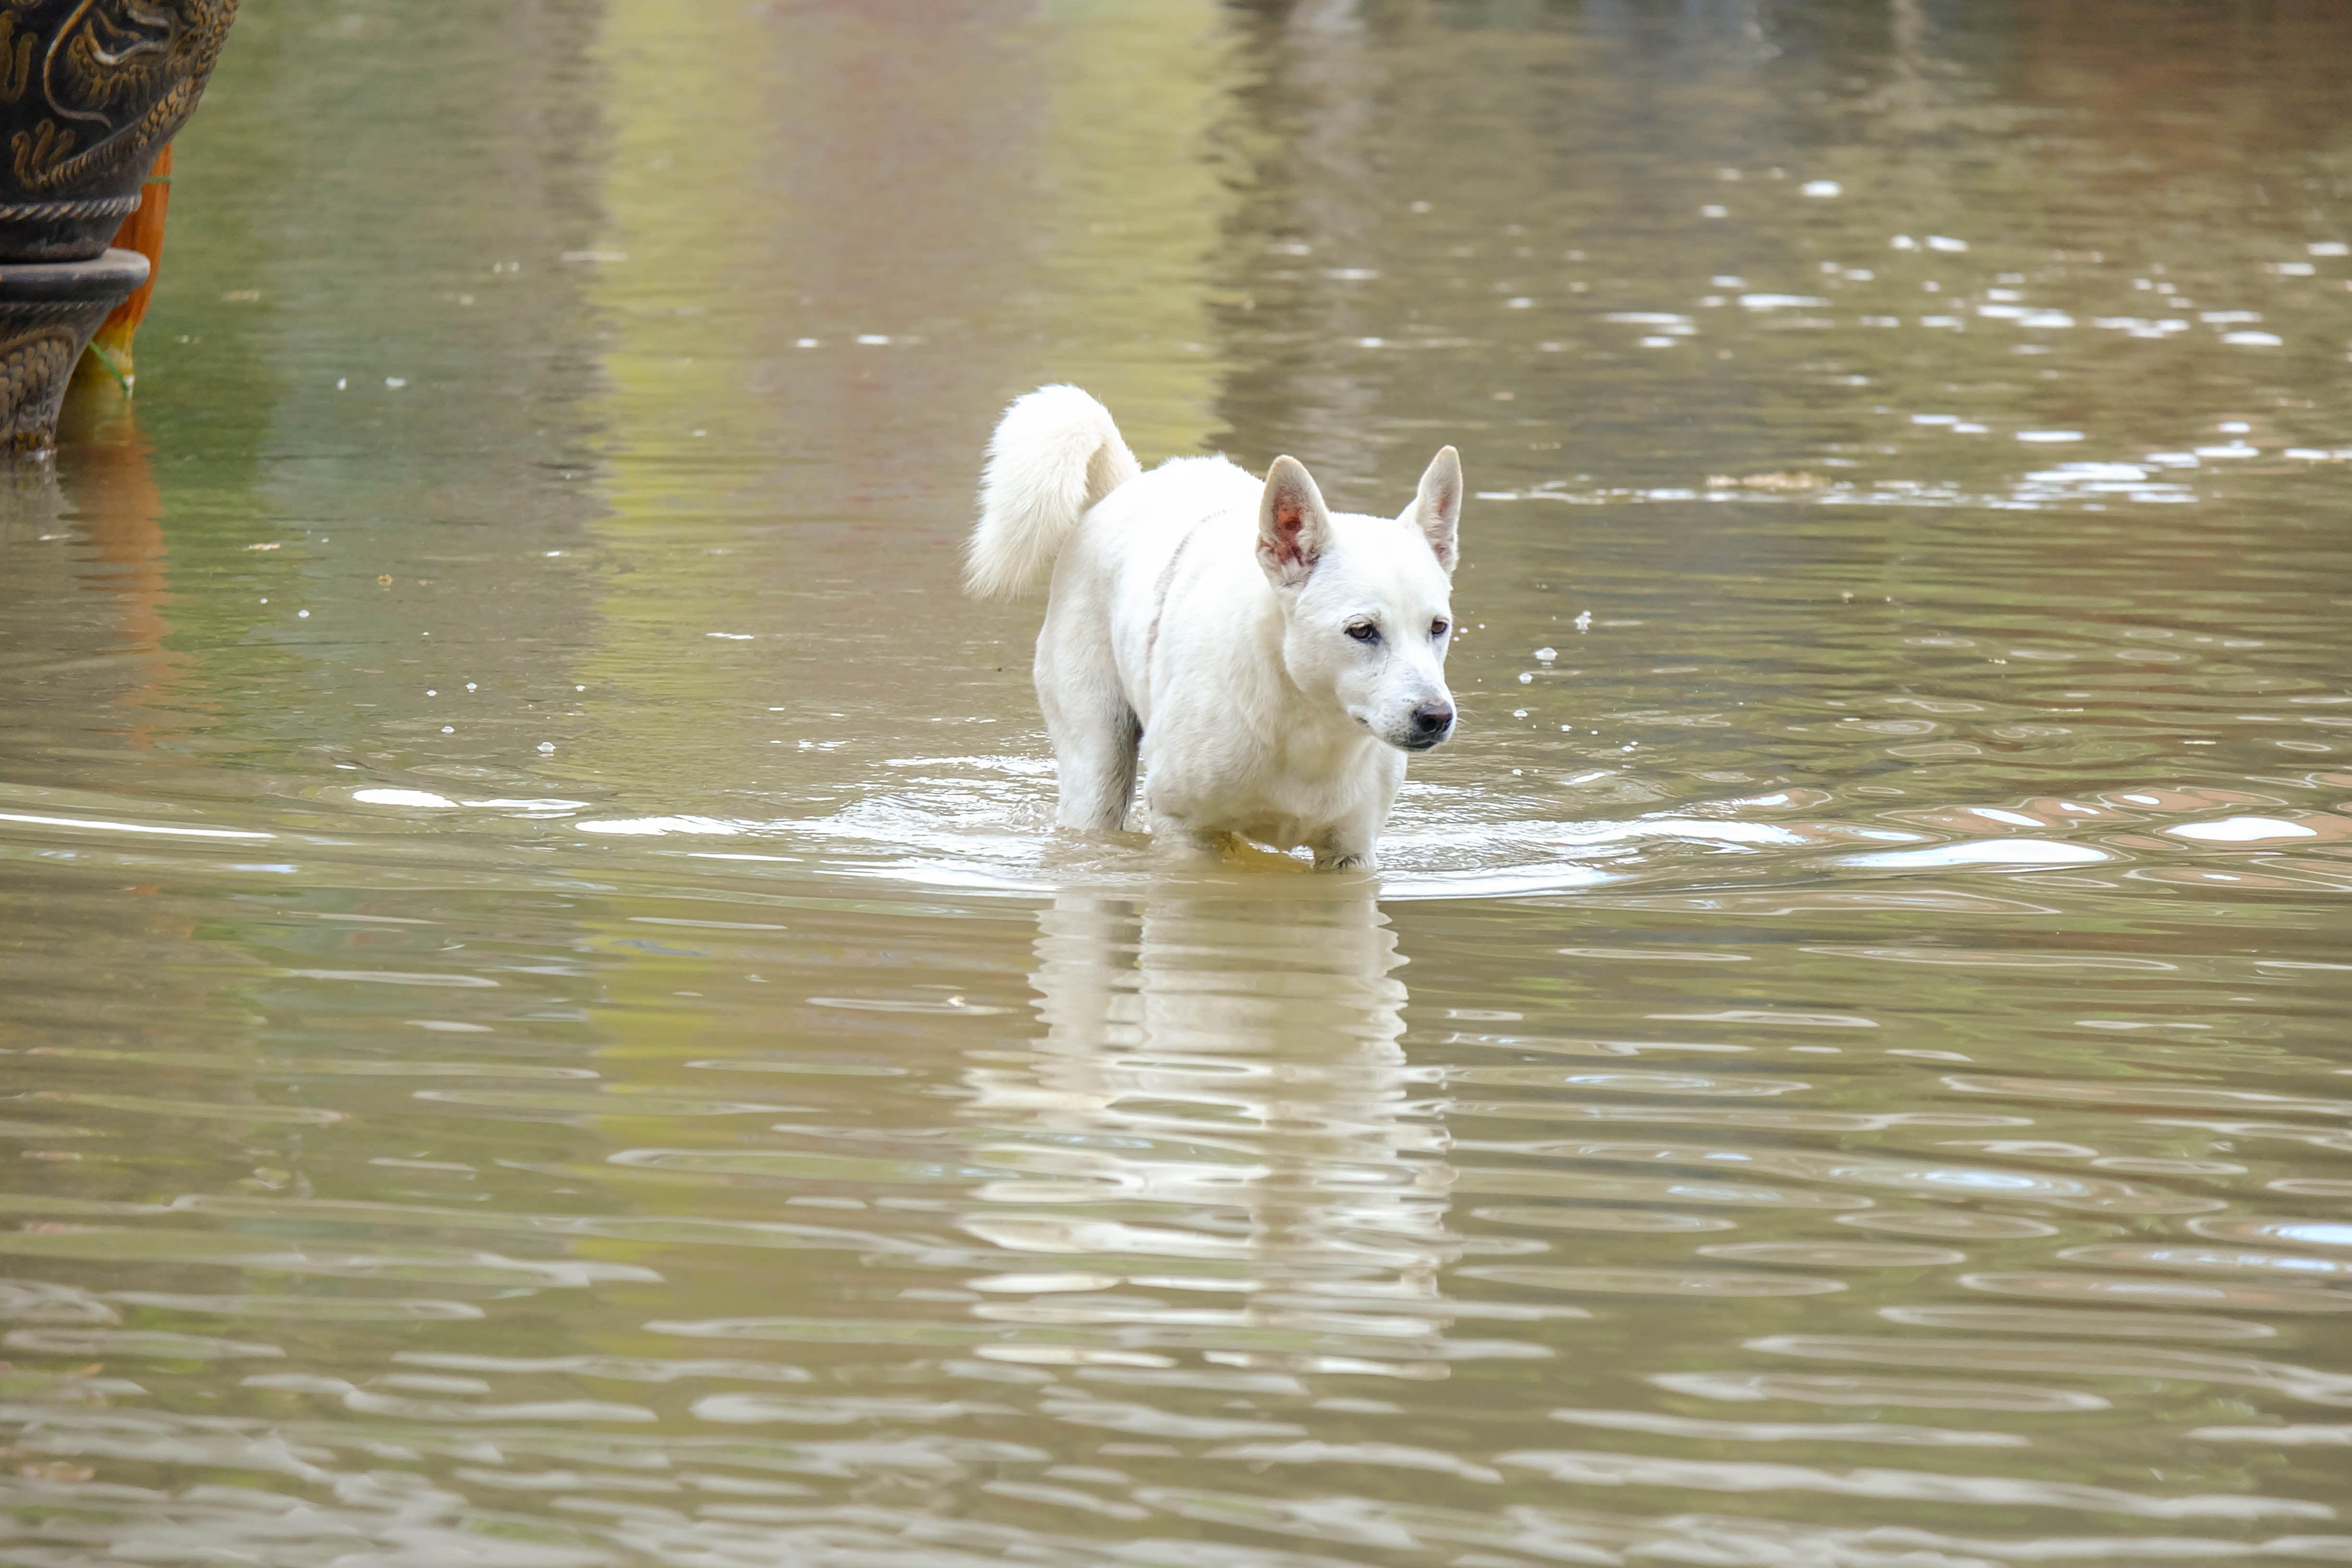 Dog walking on a flooded area